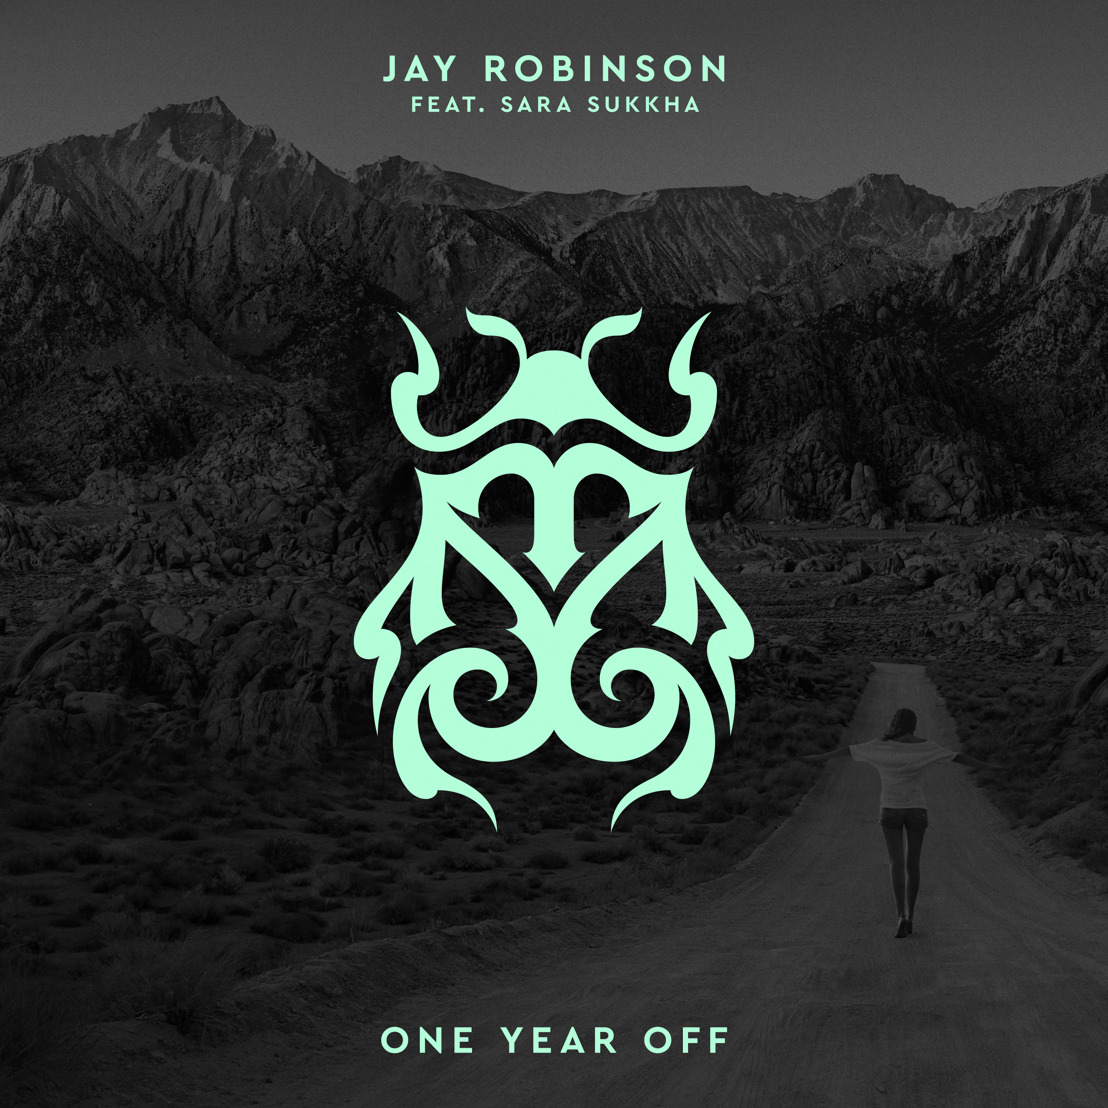 Jay Robinson returns with uplifting new single ‘One Year Off’